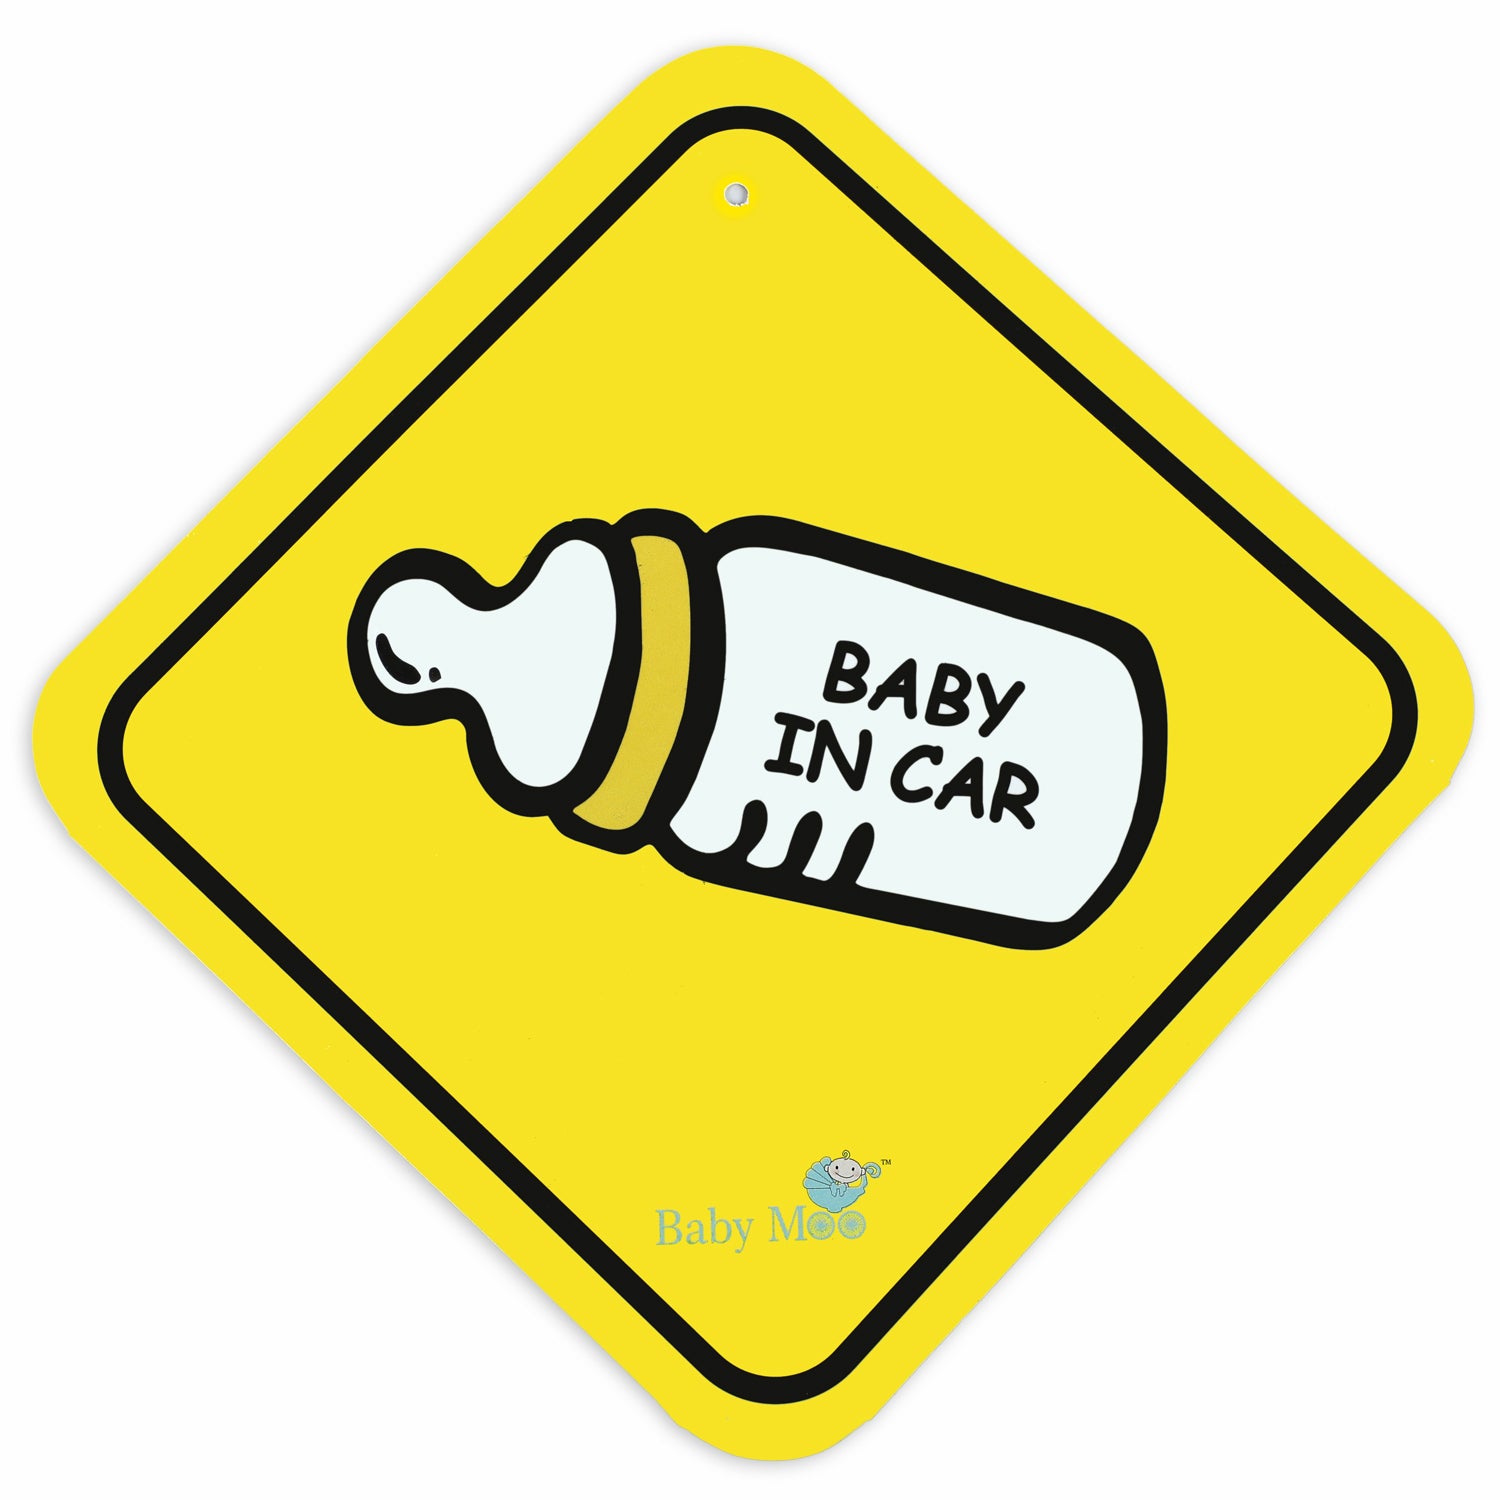 Baby Moo Feeding Bottle Sign Board With Vacuum Suction Cup Clip - Yellow - Baby Moo